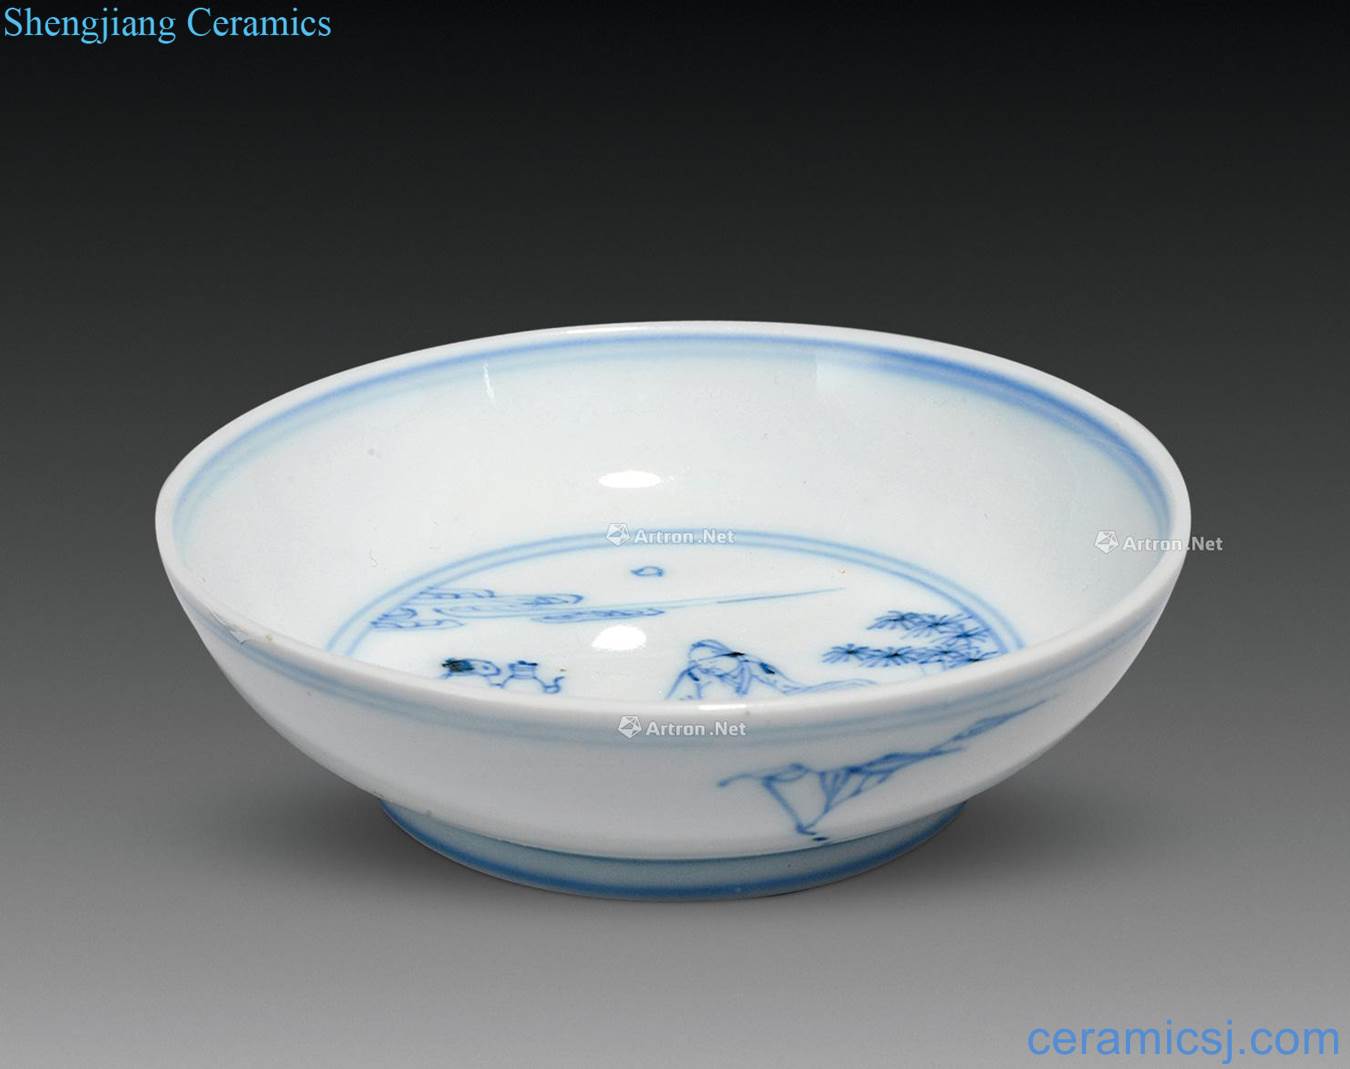 In the qing dynasty Small light blue and white characters